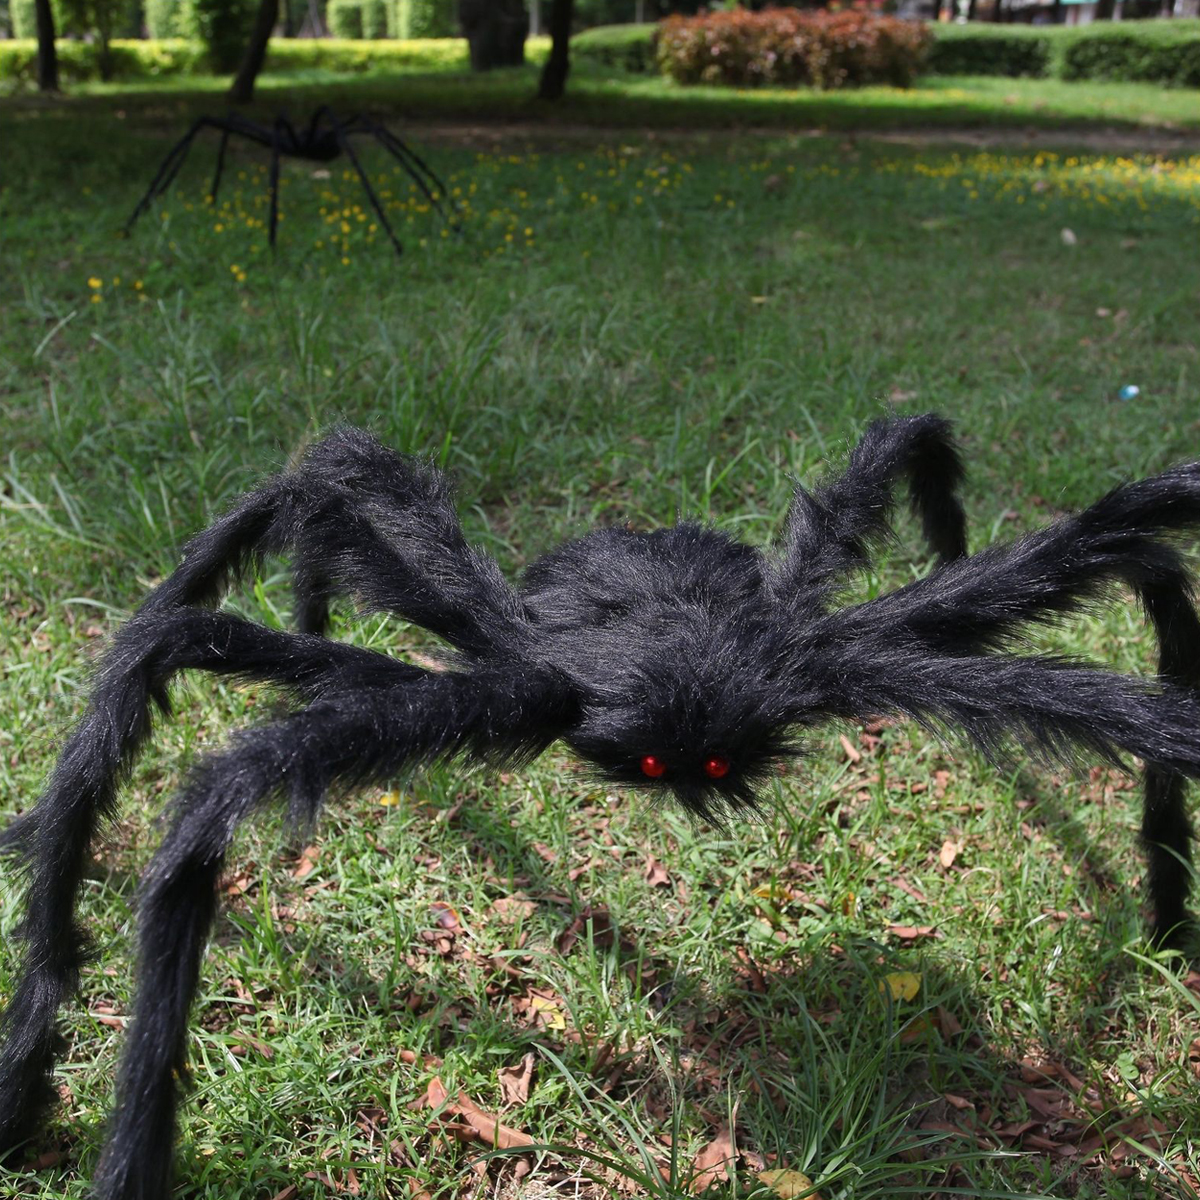 5FT150cm-Hairy-Giant-Spider-Decorations-Huge-Halloween-Outdoor-Decor-Toys-for-Party-1210153